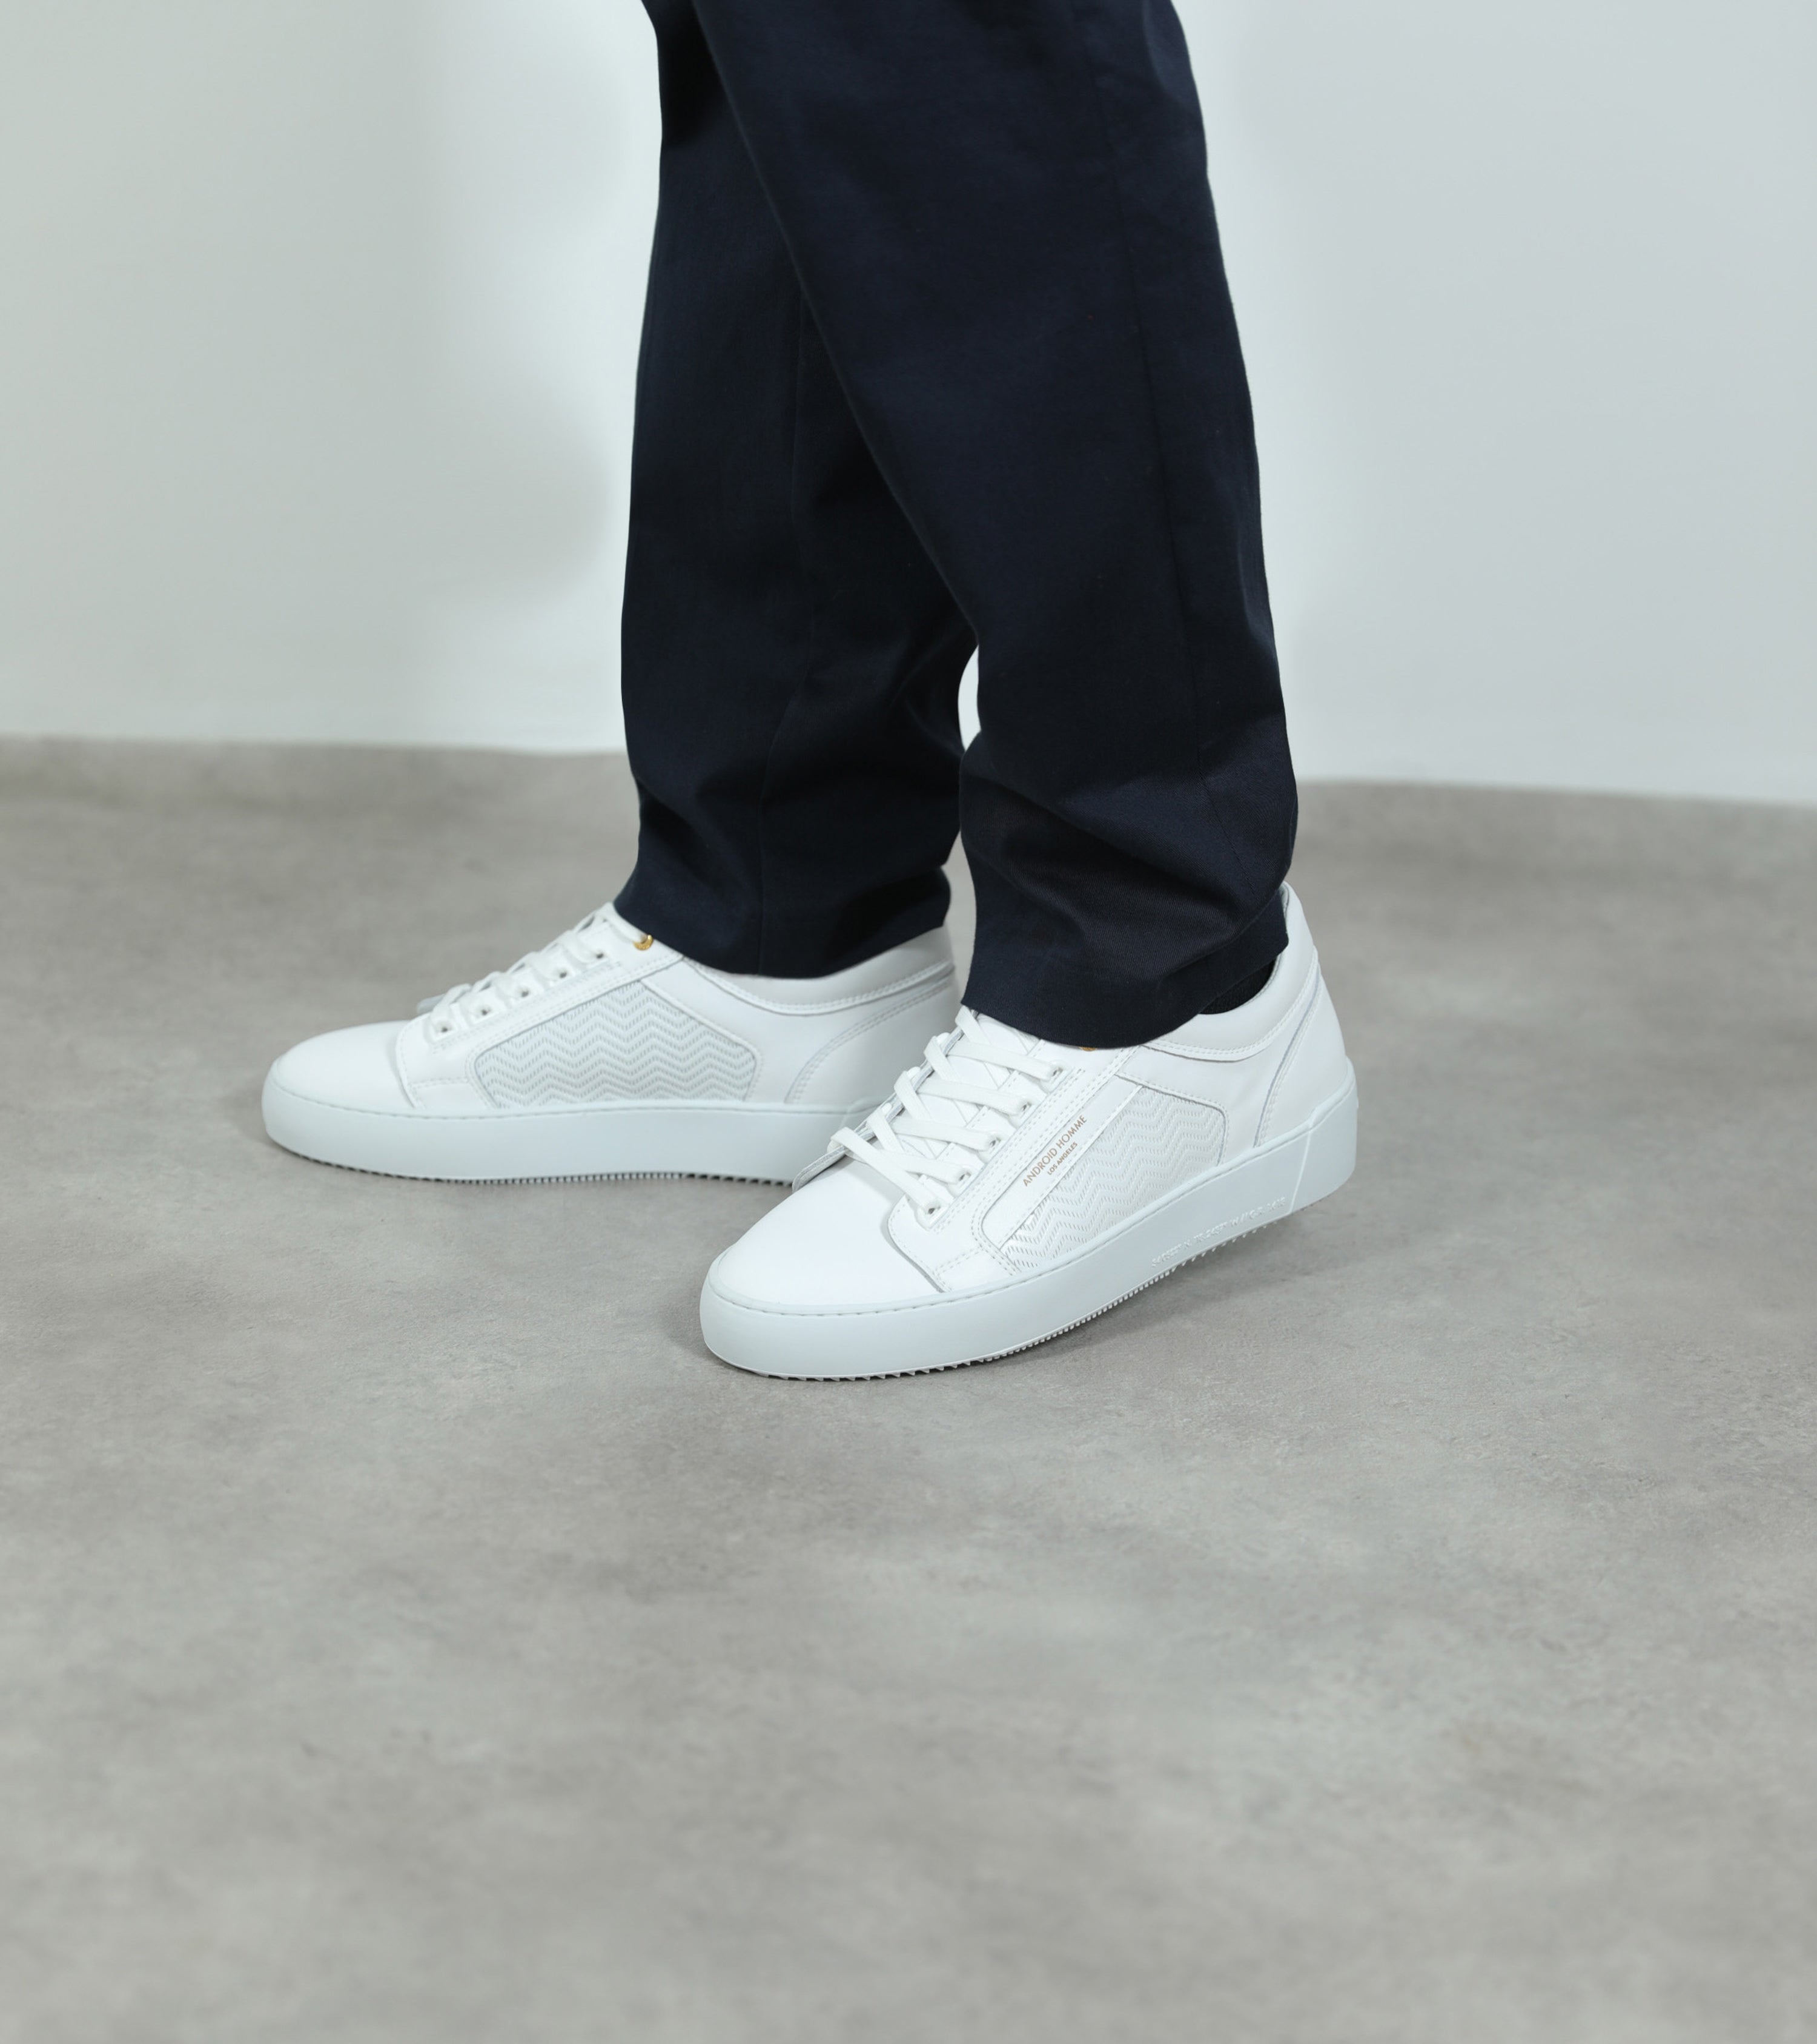 Ecom imagery of the Venice White Emboss Leather Android Homme Trainers on foot.